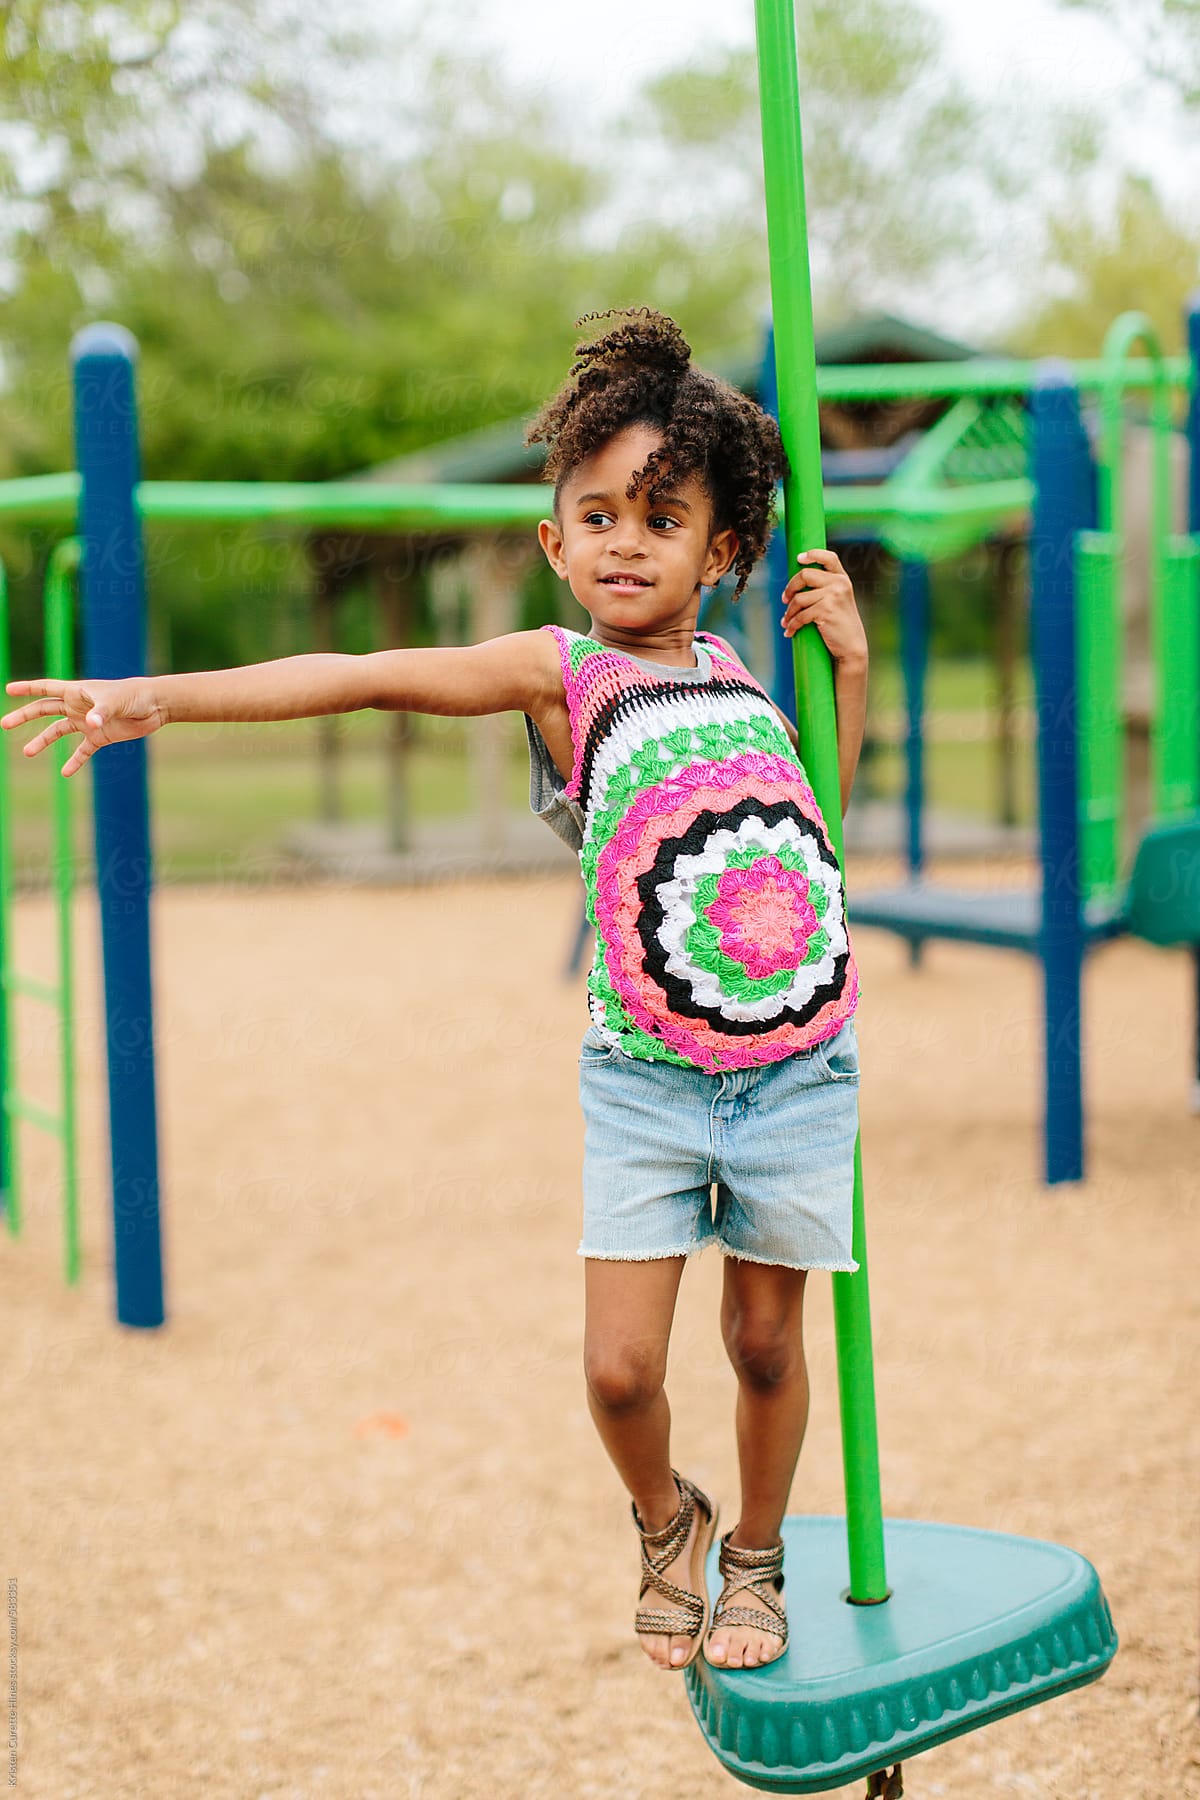 A Little Girl Sliding Down A Green Slide At The Playground. by Stocksy  Contributor Kristen Curette & Daemaine Hines - Stocksy